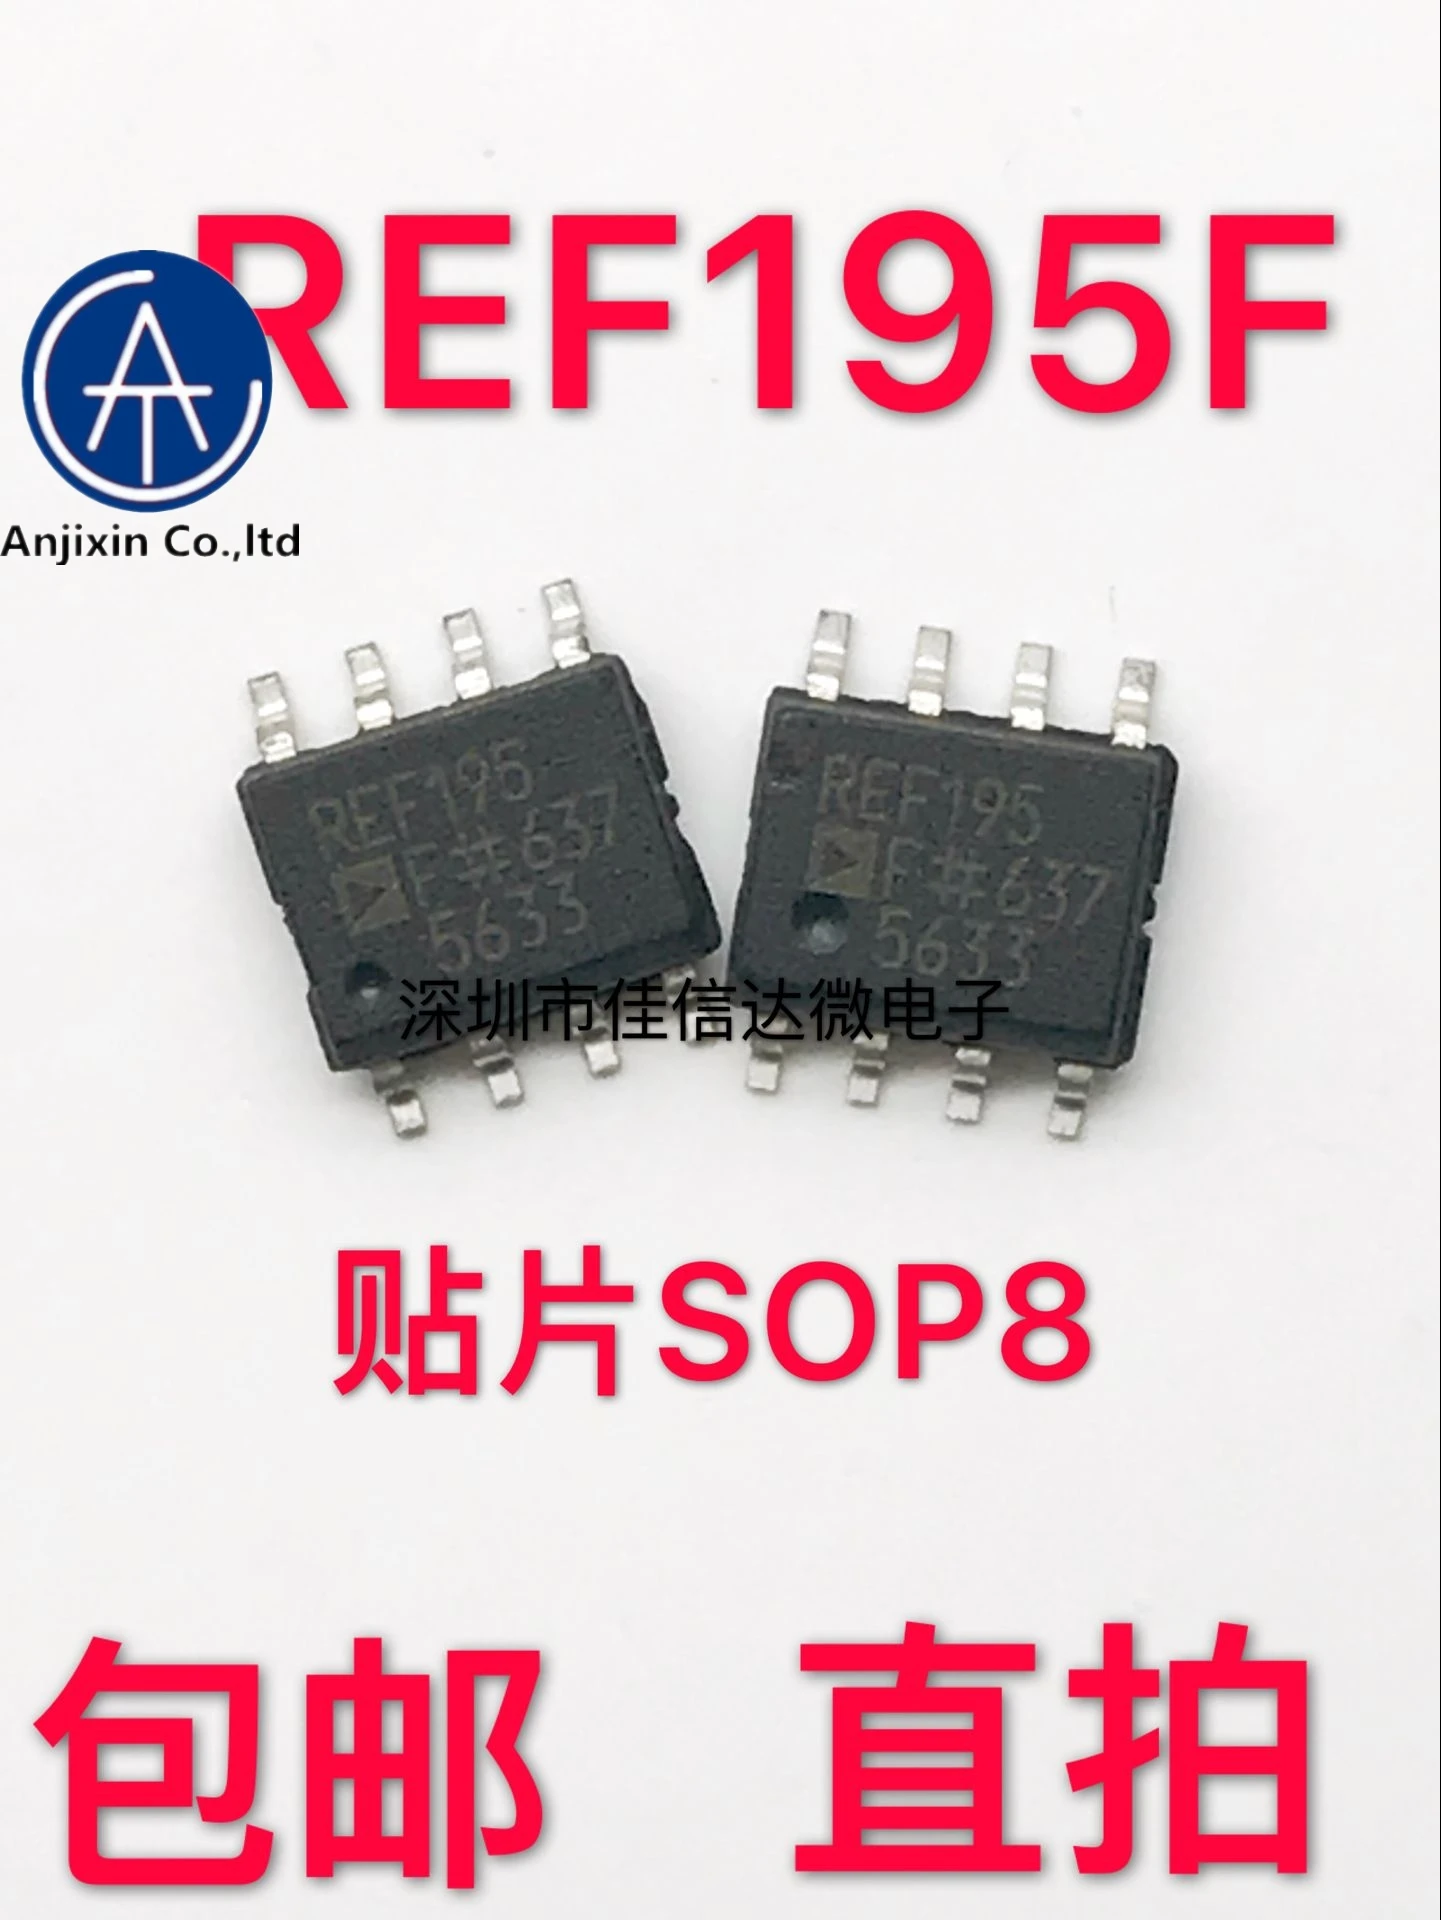 

10pcs 100% orginal new real stock REF195F REF195FSZ SOP8 precision micro power low dropout voltage reference